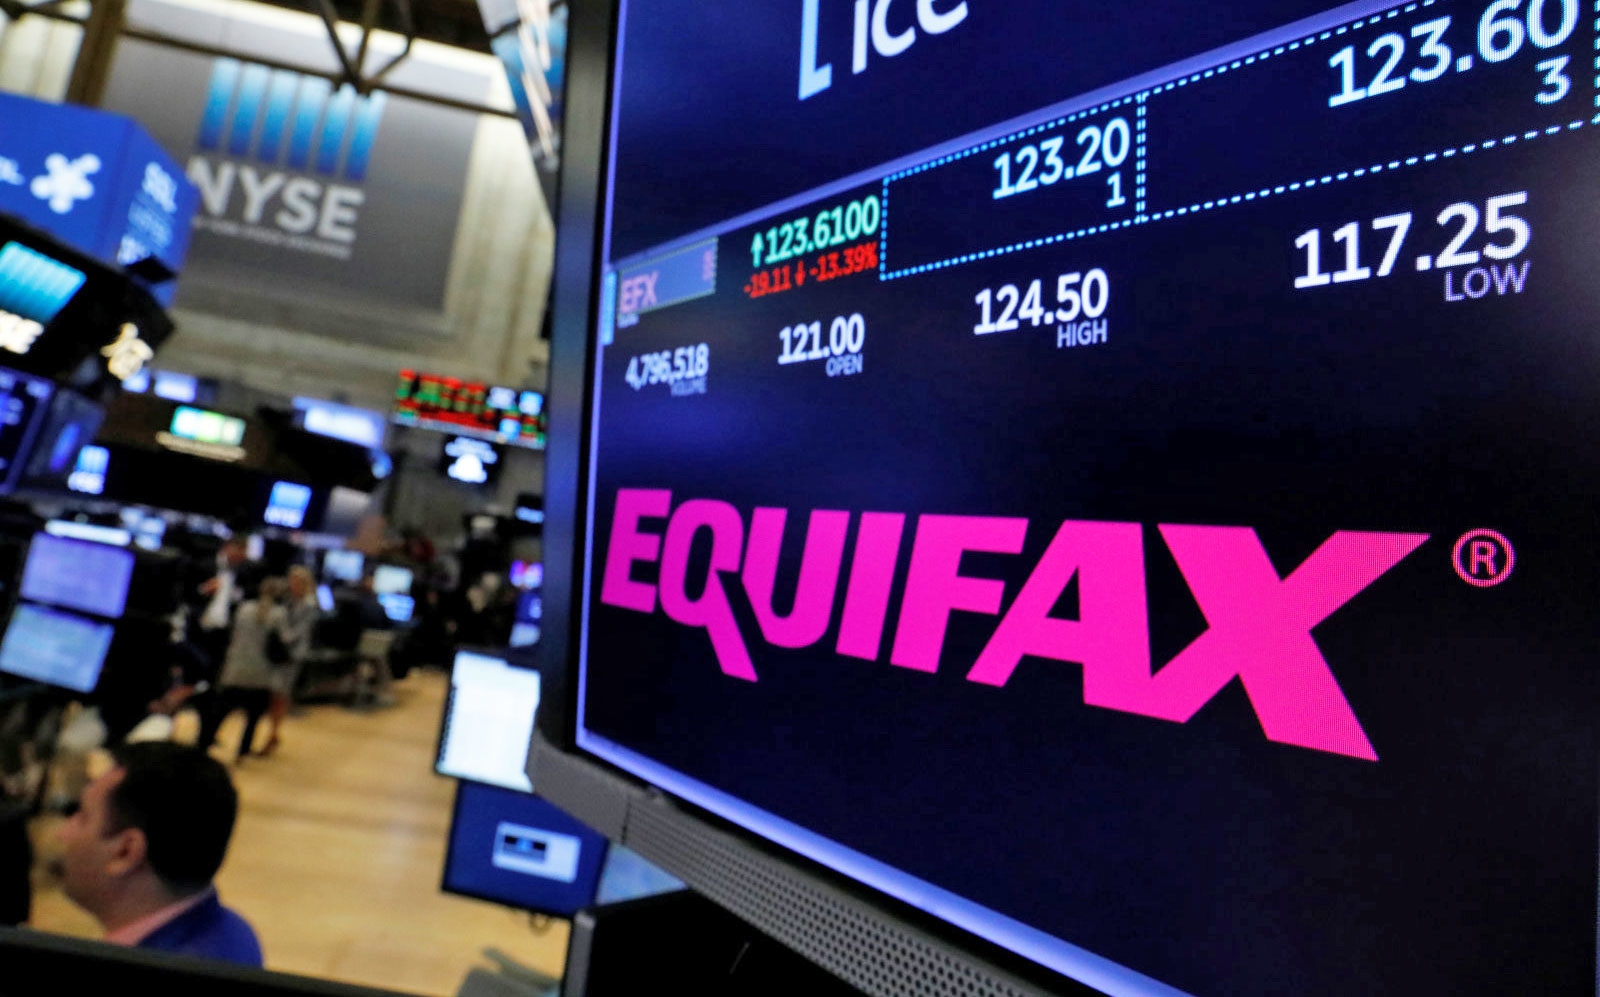 Equifax waives credit freeze fees after facing backlash | DeviceDaily.com